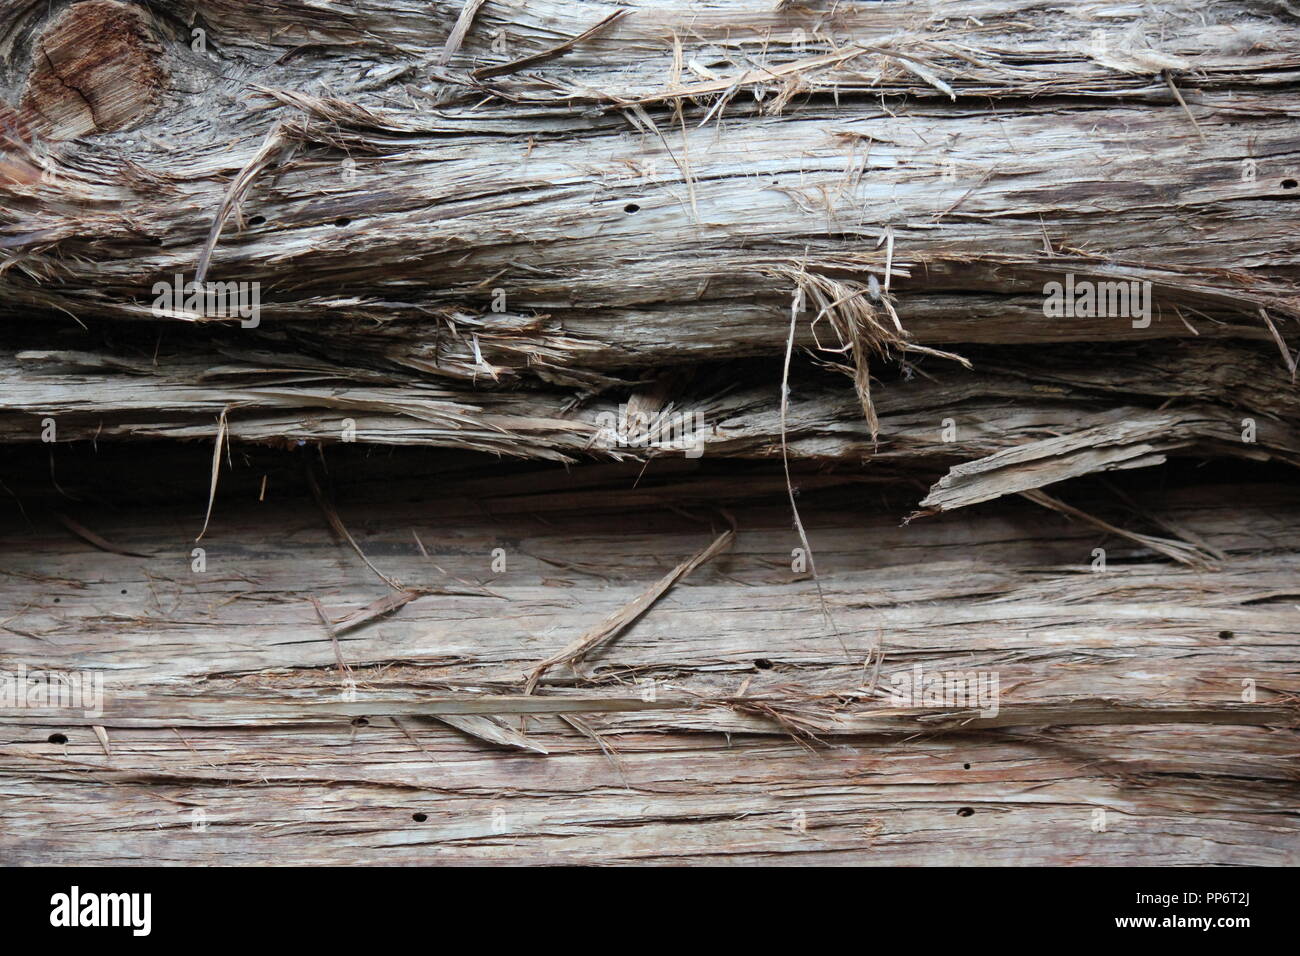 Rotting timber log with wood fibers hanging from the side, raw material. Stock Photo